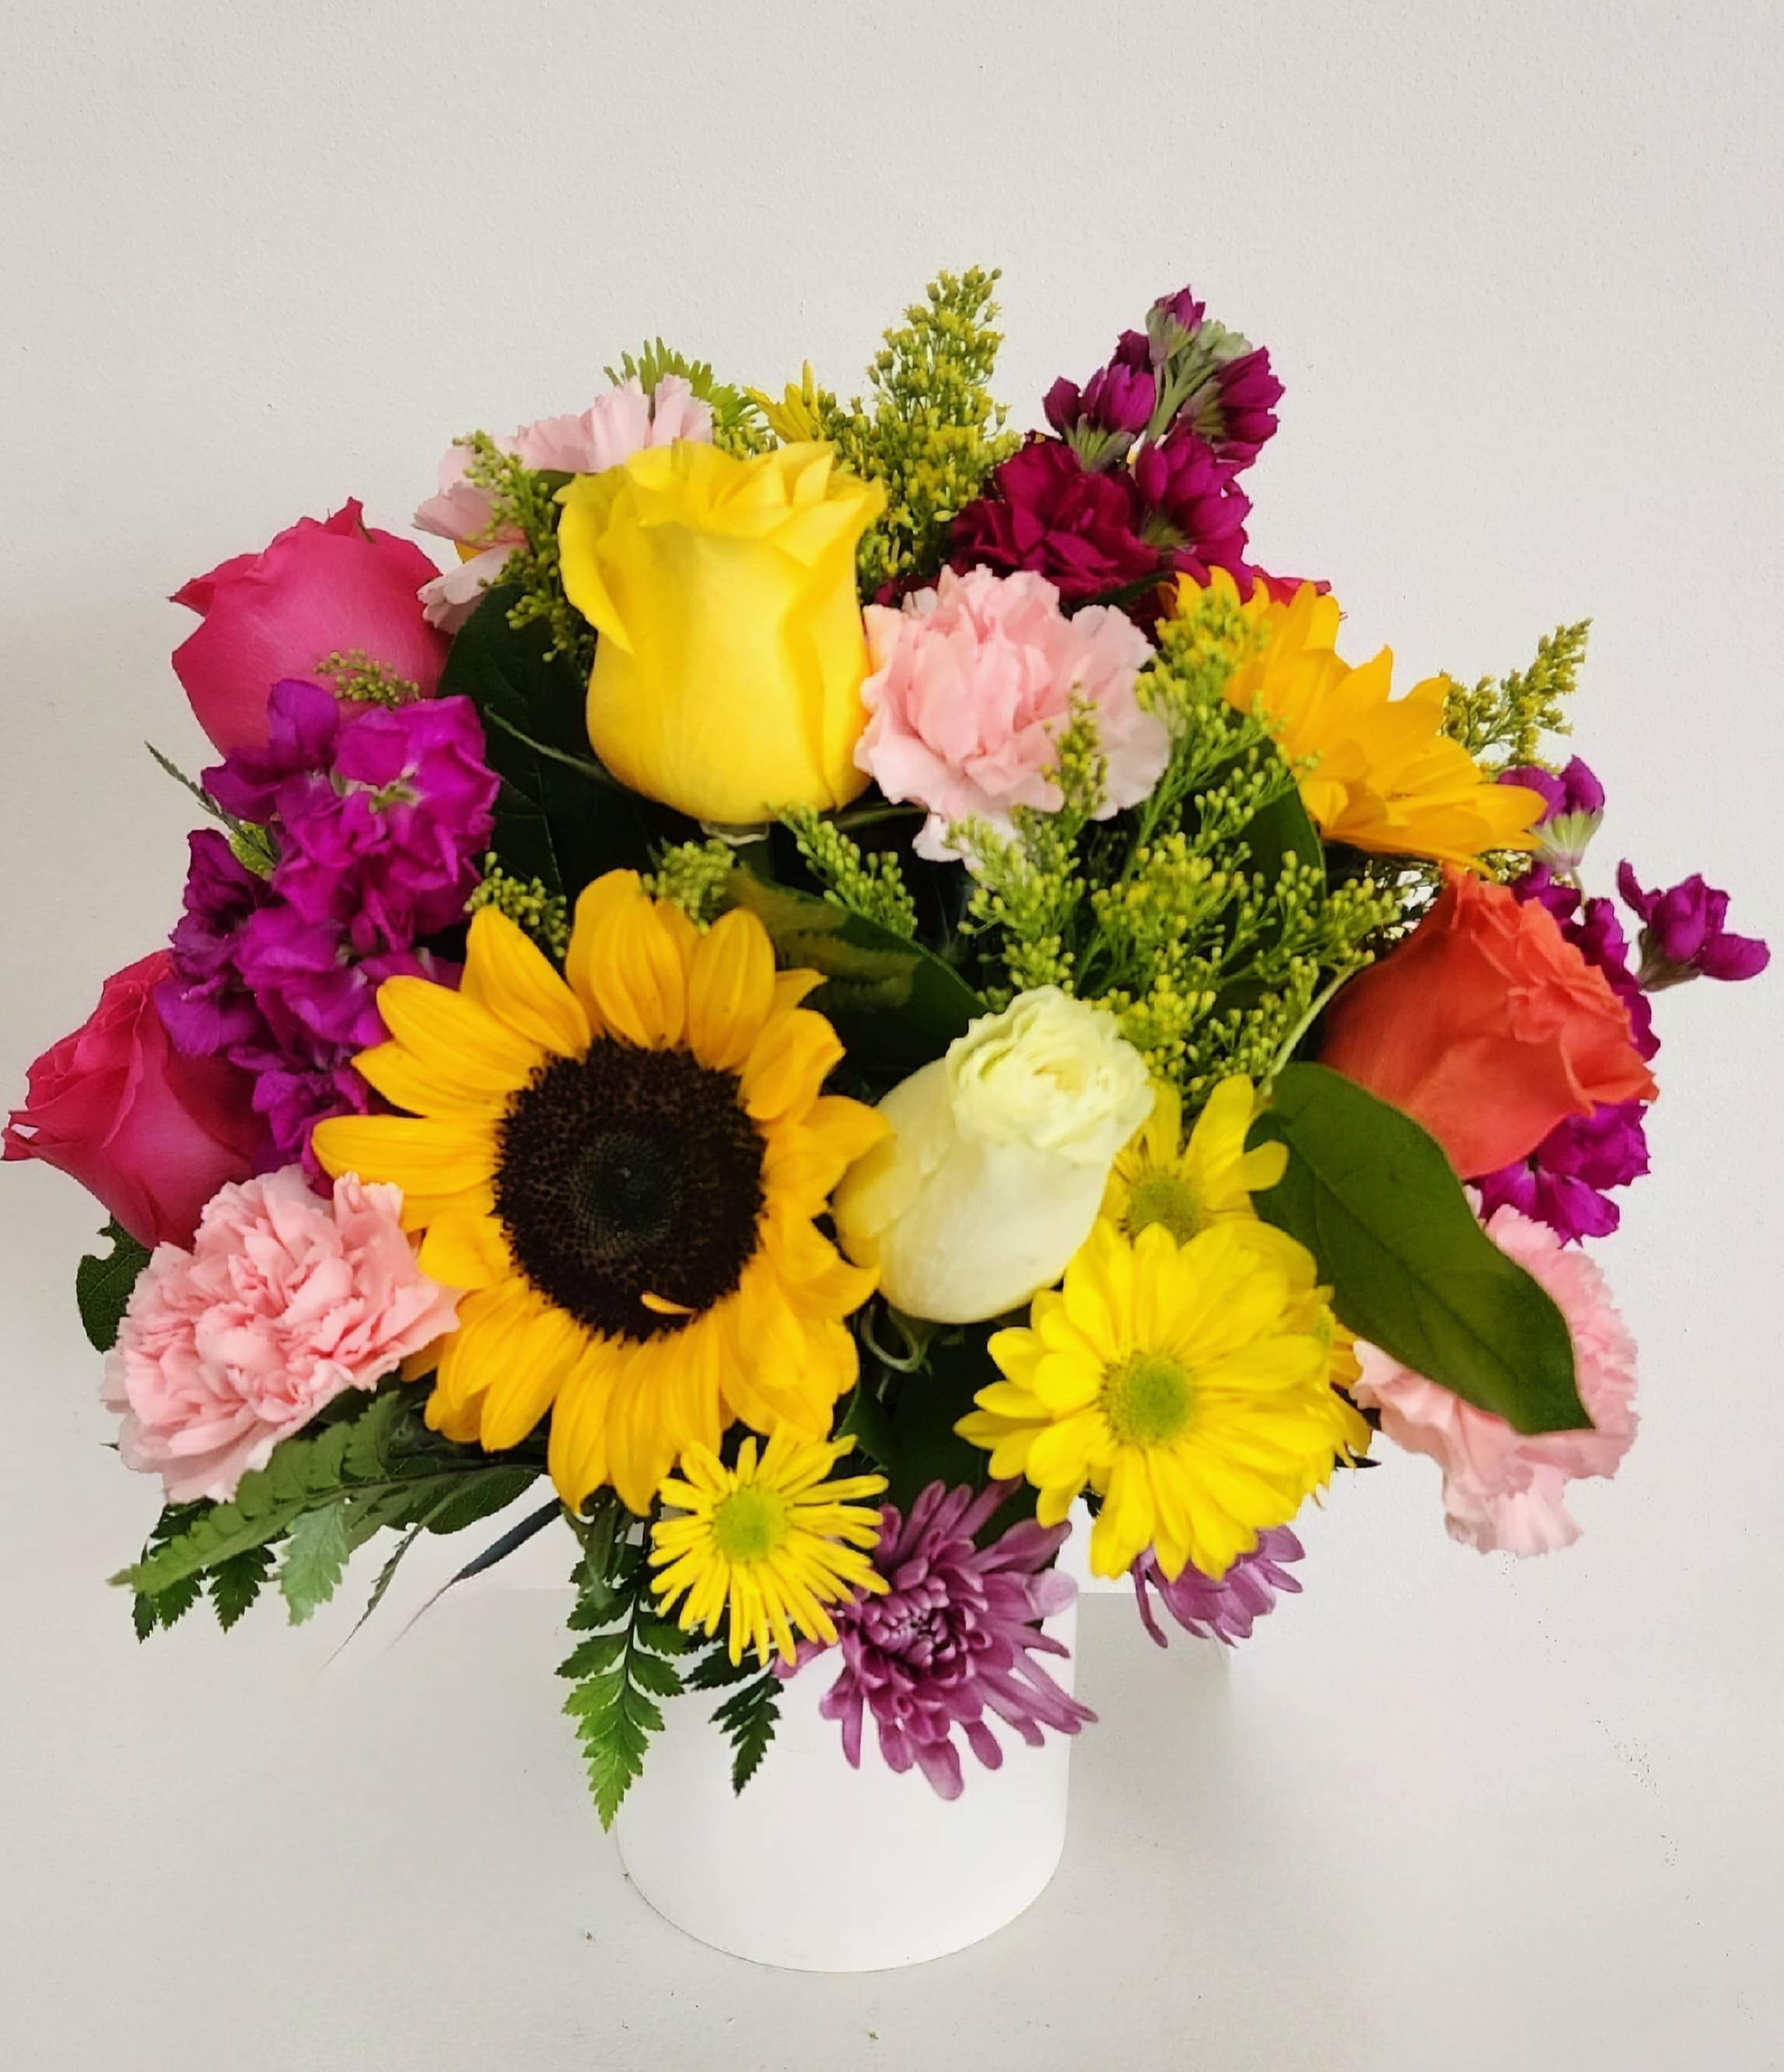 Large Delightful Mix - A white ceramic vase filled with several roses, sunflowers or lilies, gerberas, daisies, carnations, and chrysanthemums.  This mix is so gorgeous,  it will brighten up all who view it. Size is large low style.